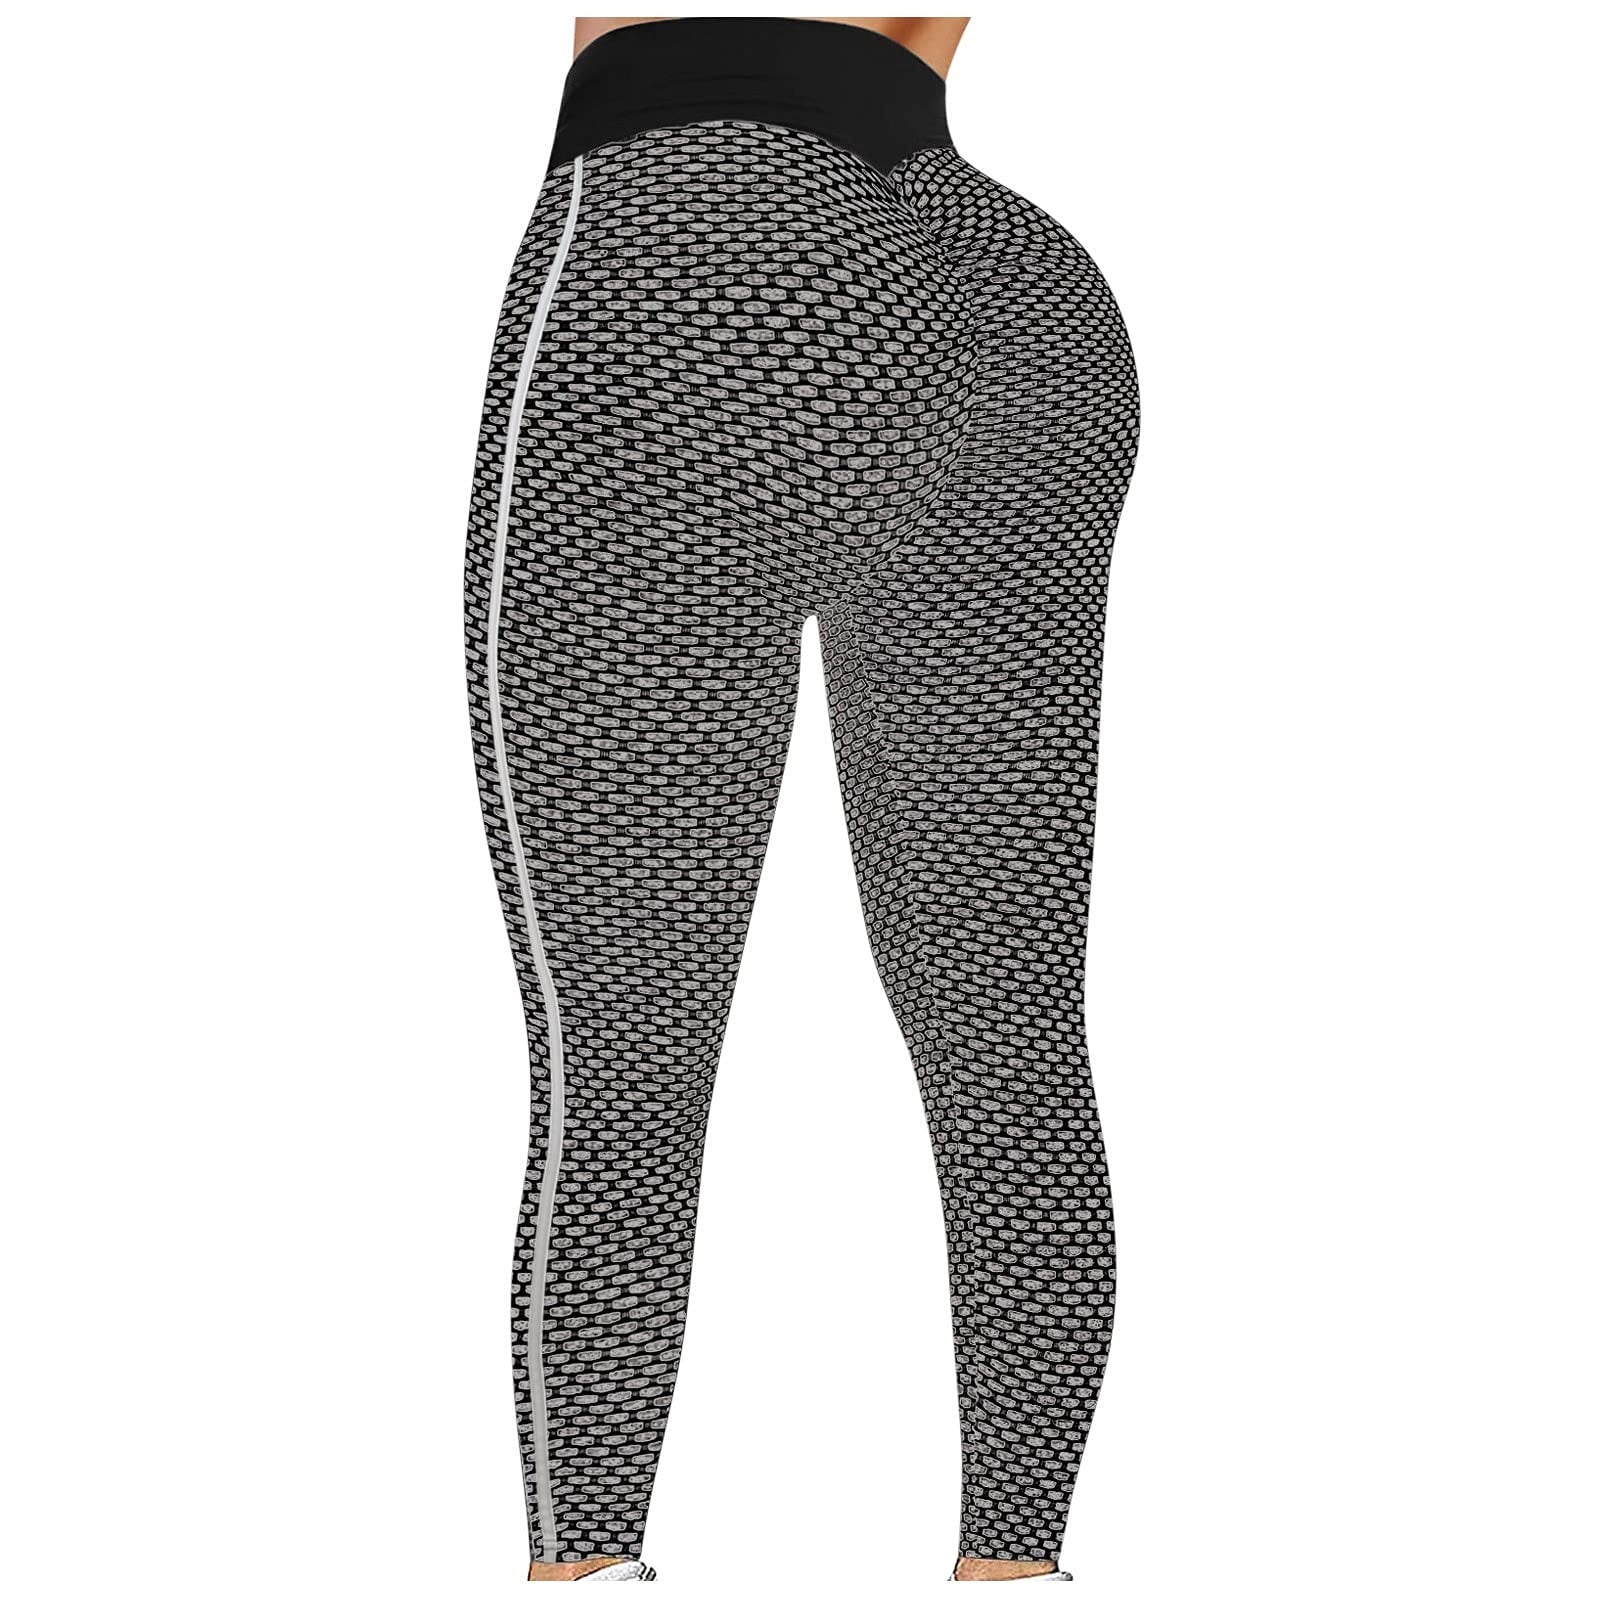 Low Rise Leggings for Women Leggings for Girls High Waist Sweatpants Women  Butt Lifting Workout Leggings Deals Under 22 Dollars Today Deals Prime  Clearance Clearance Prime Grey